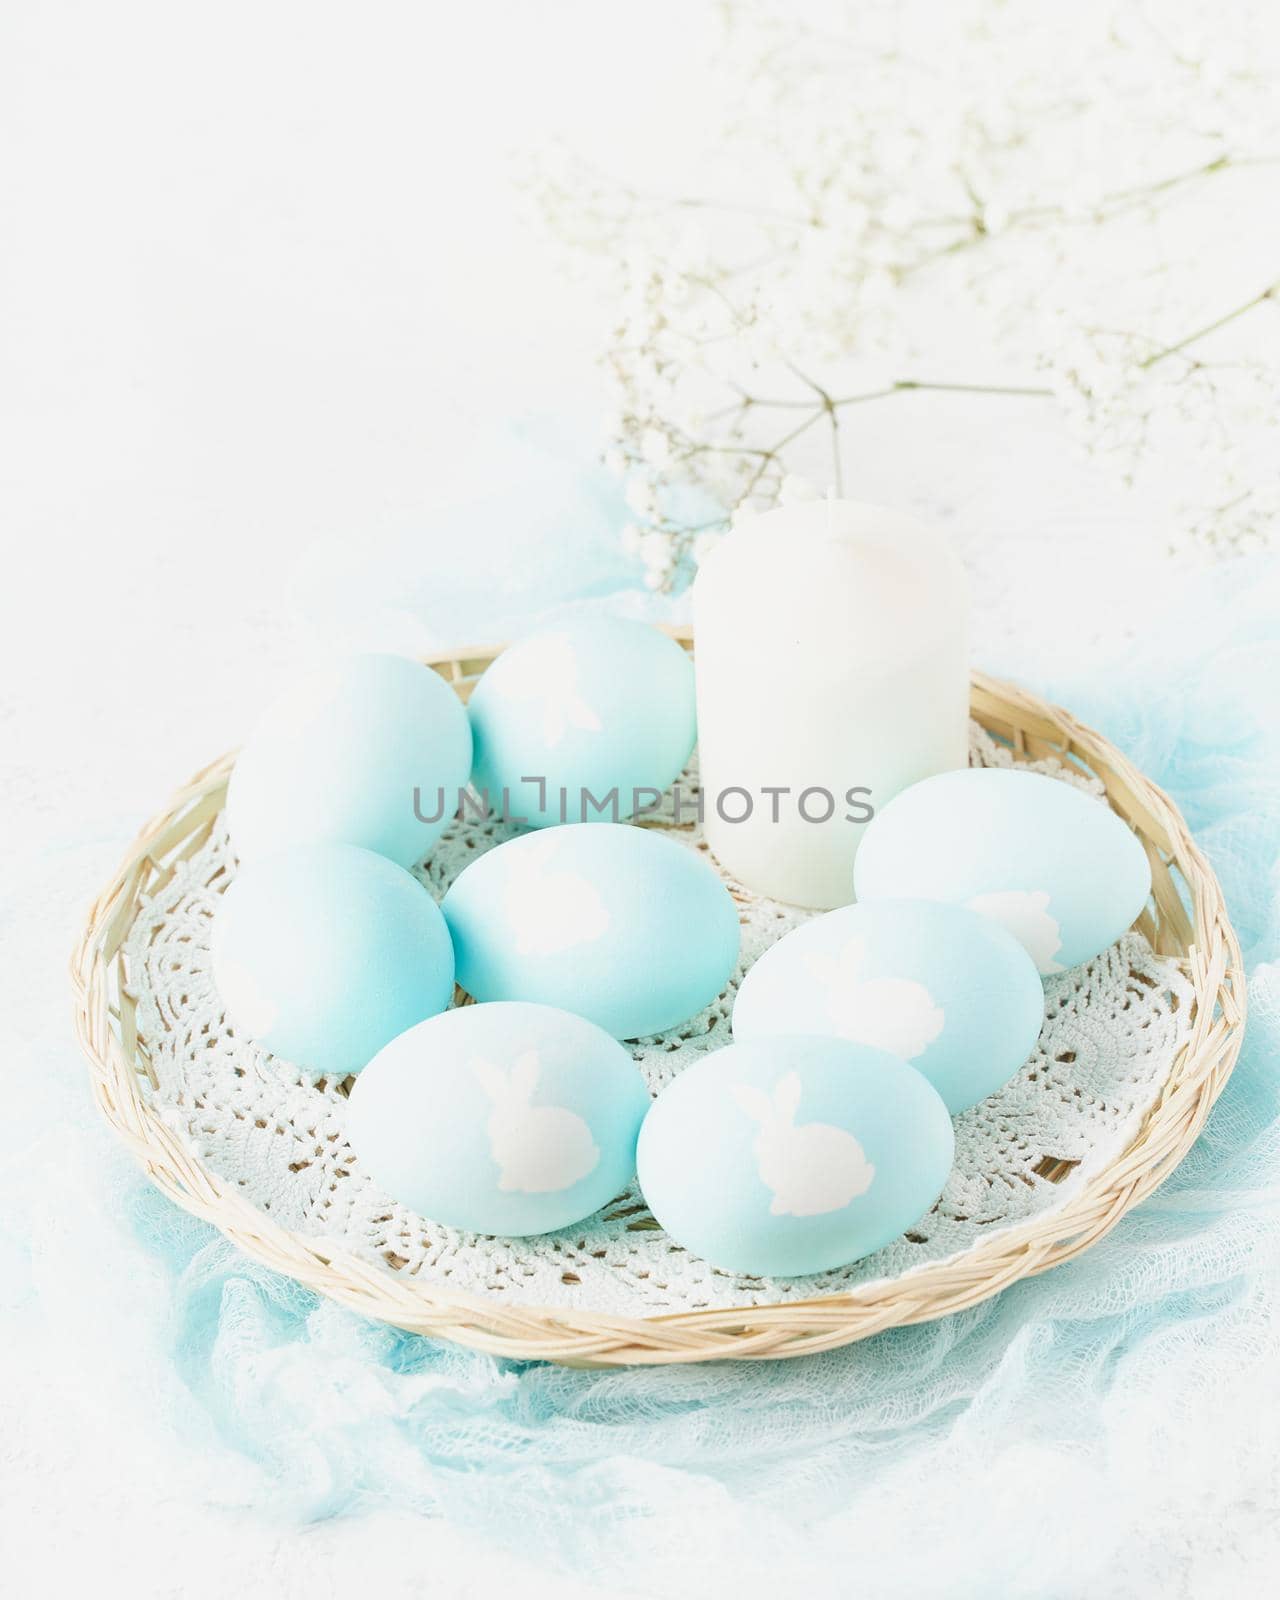 Easter. Holiday. Light white background, gentle pastel colors. Blue eggs with image of rabbit in basket. Flowers in background, side view, vertical